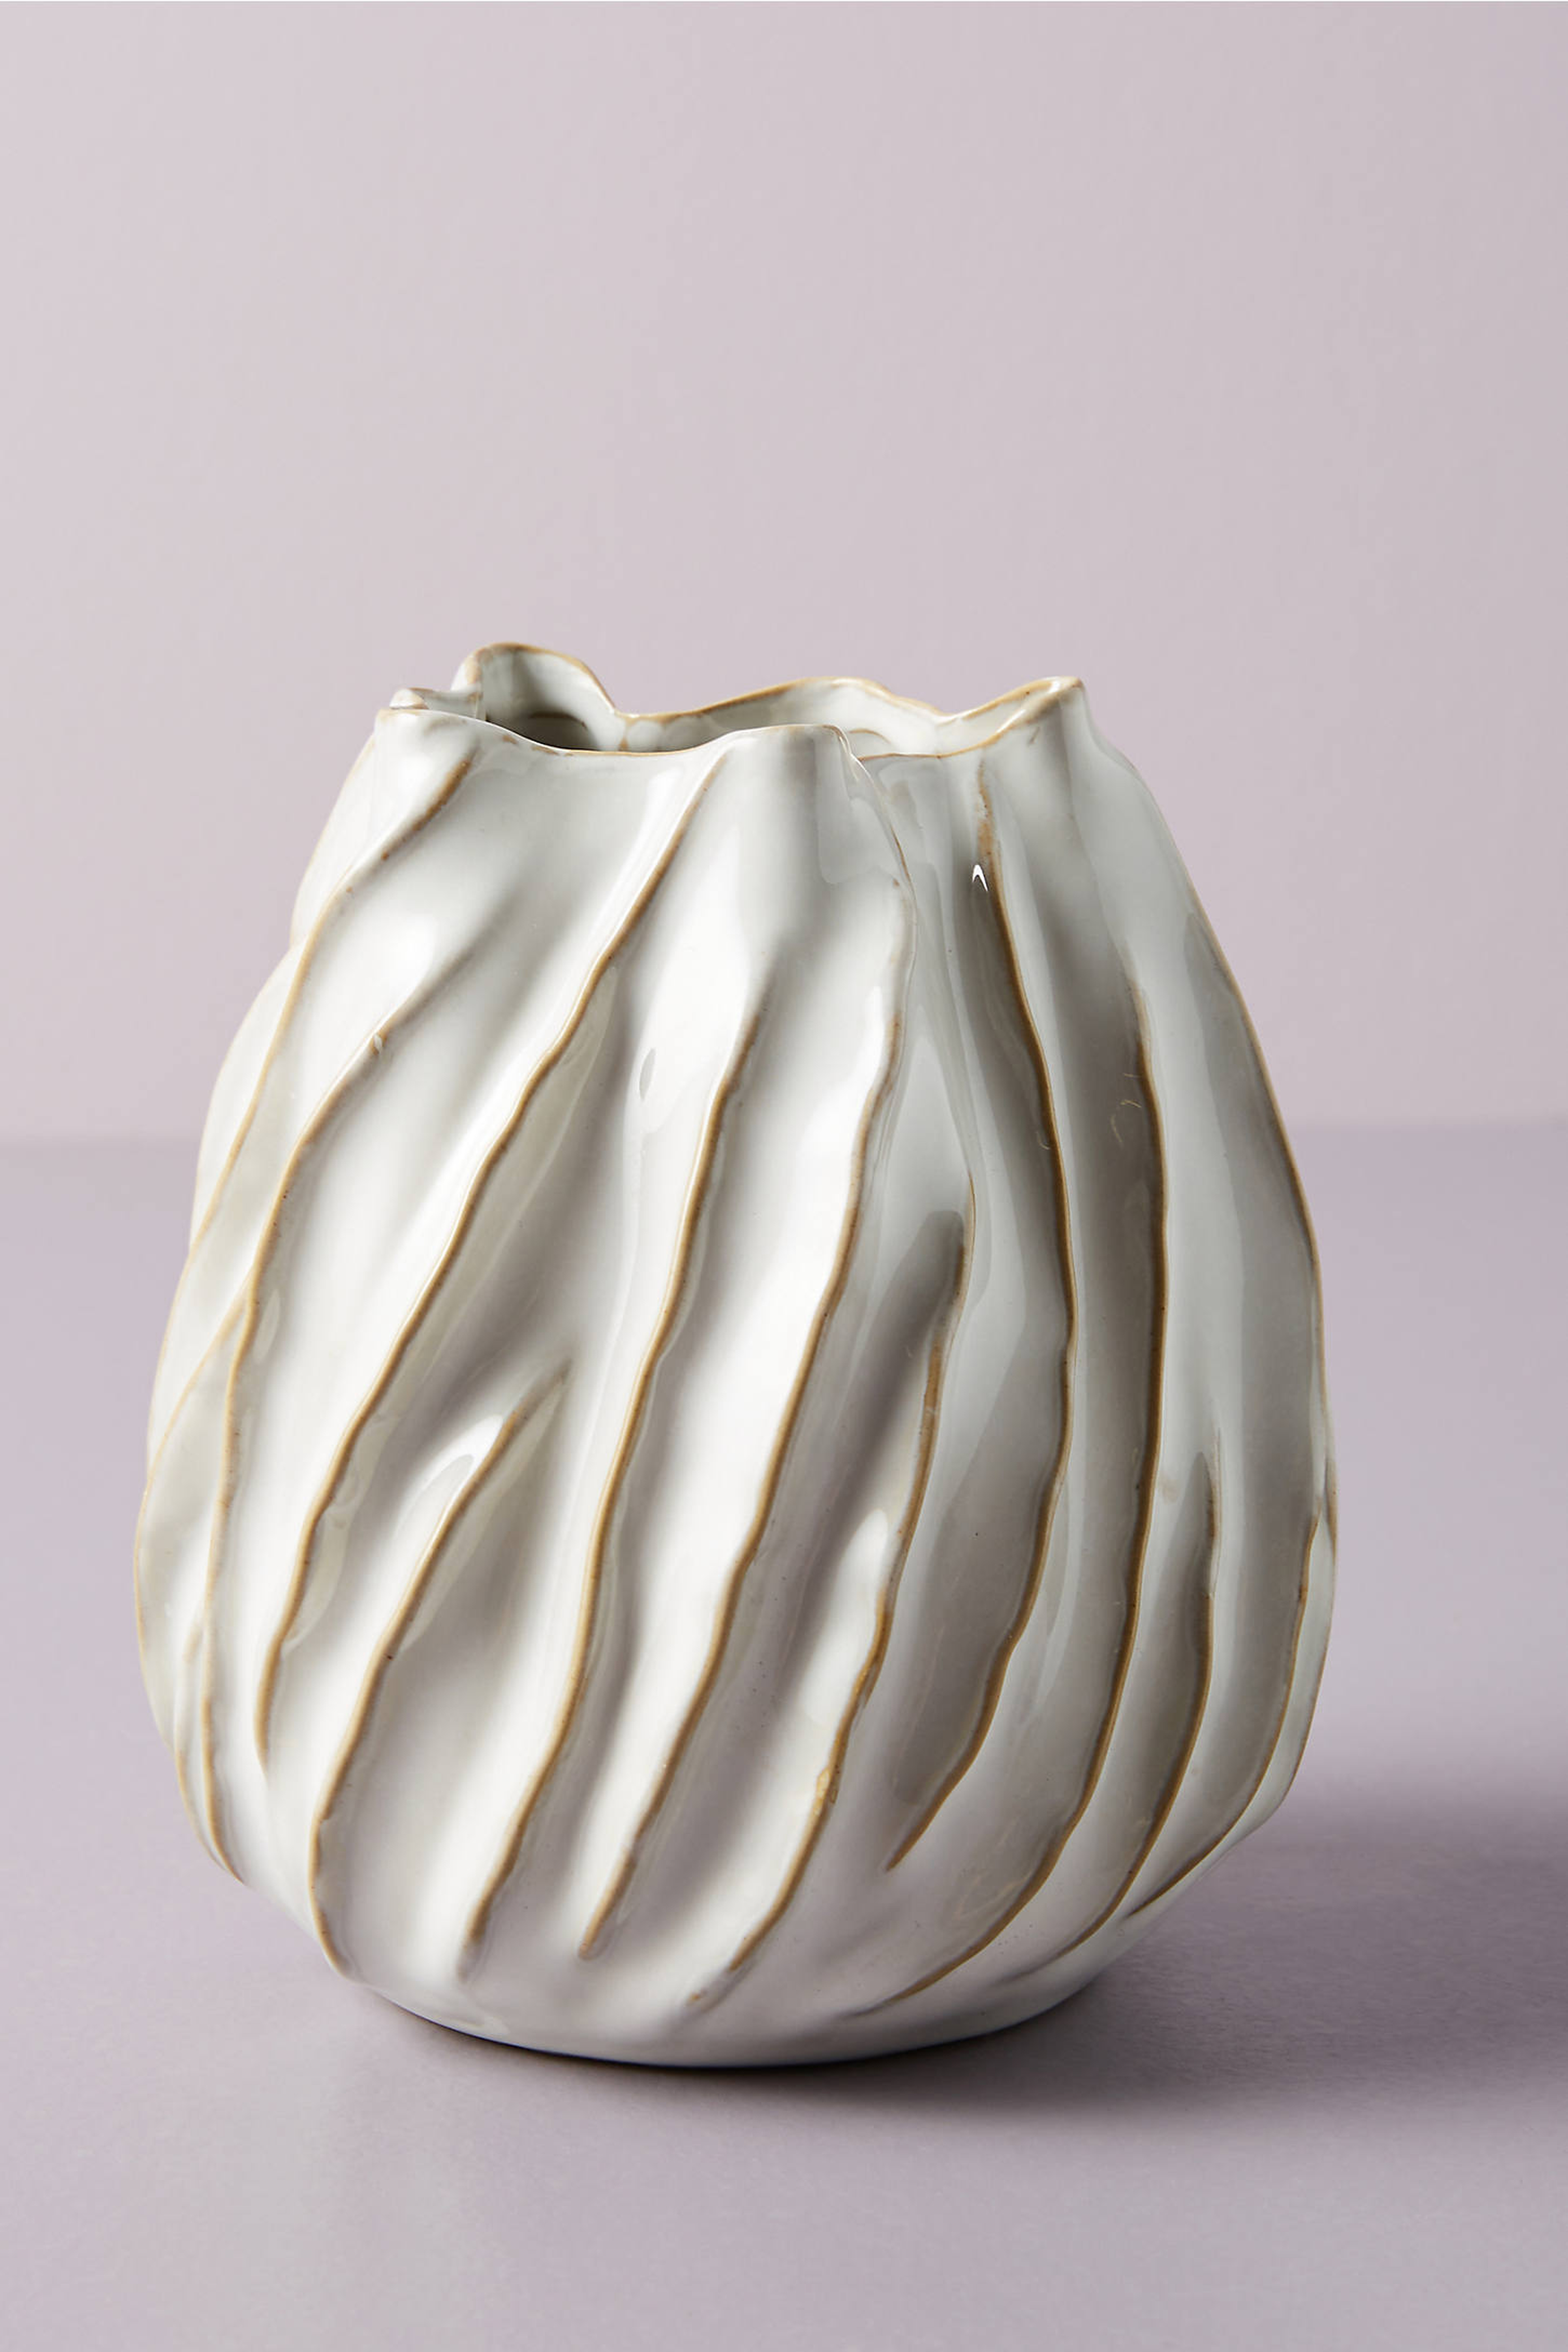 Mooney Vase By Anthropologie in White Size S - Anthropologie